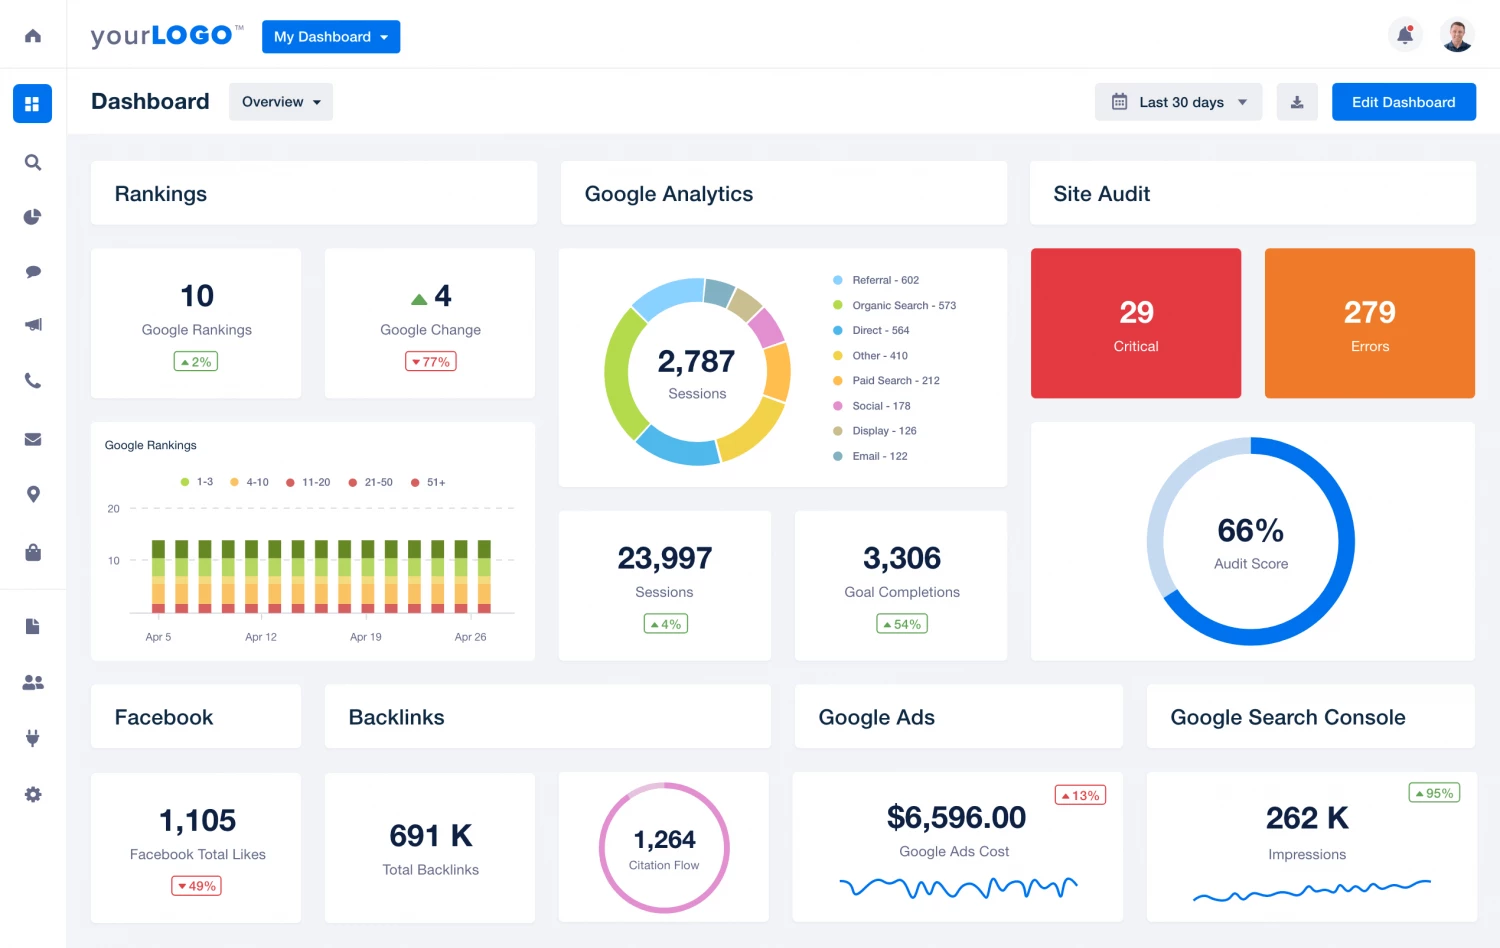 AgencyAnalytics is a reporting tool designed specifically for marketing agencies.